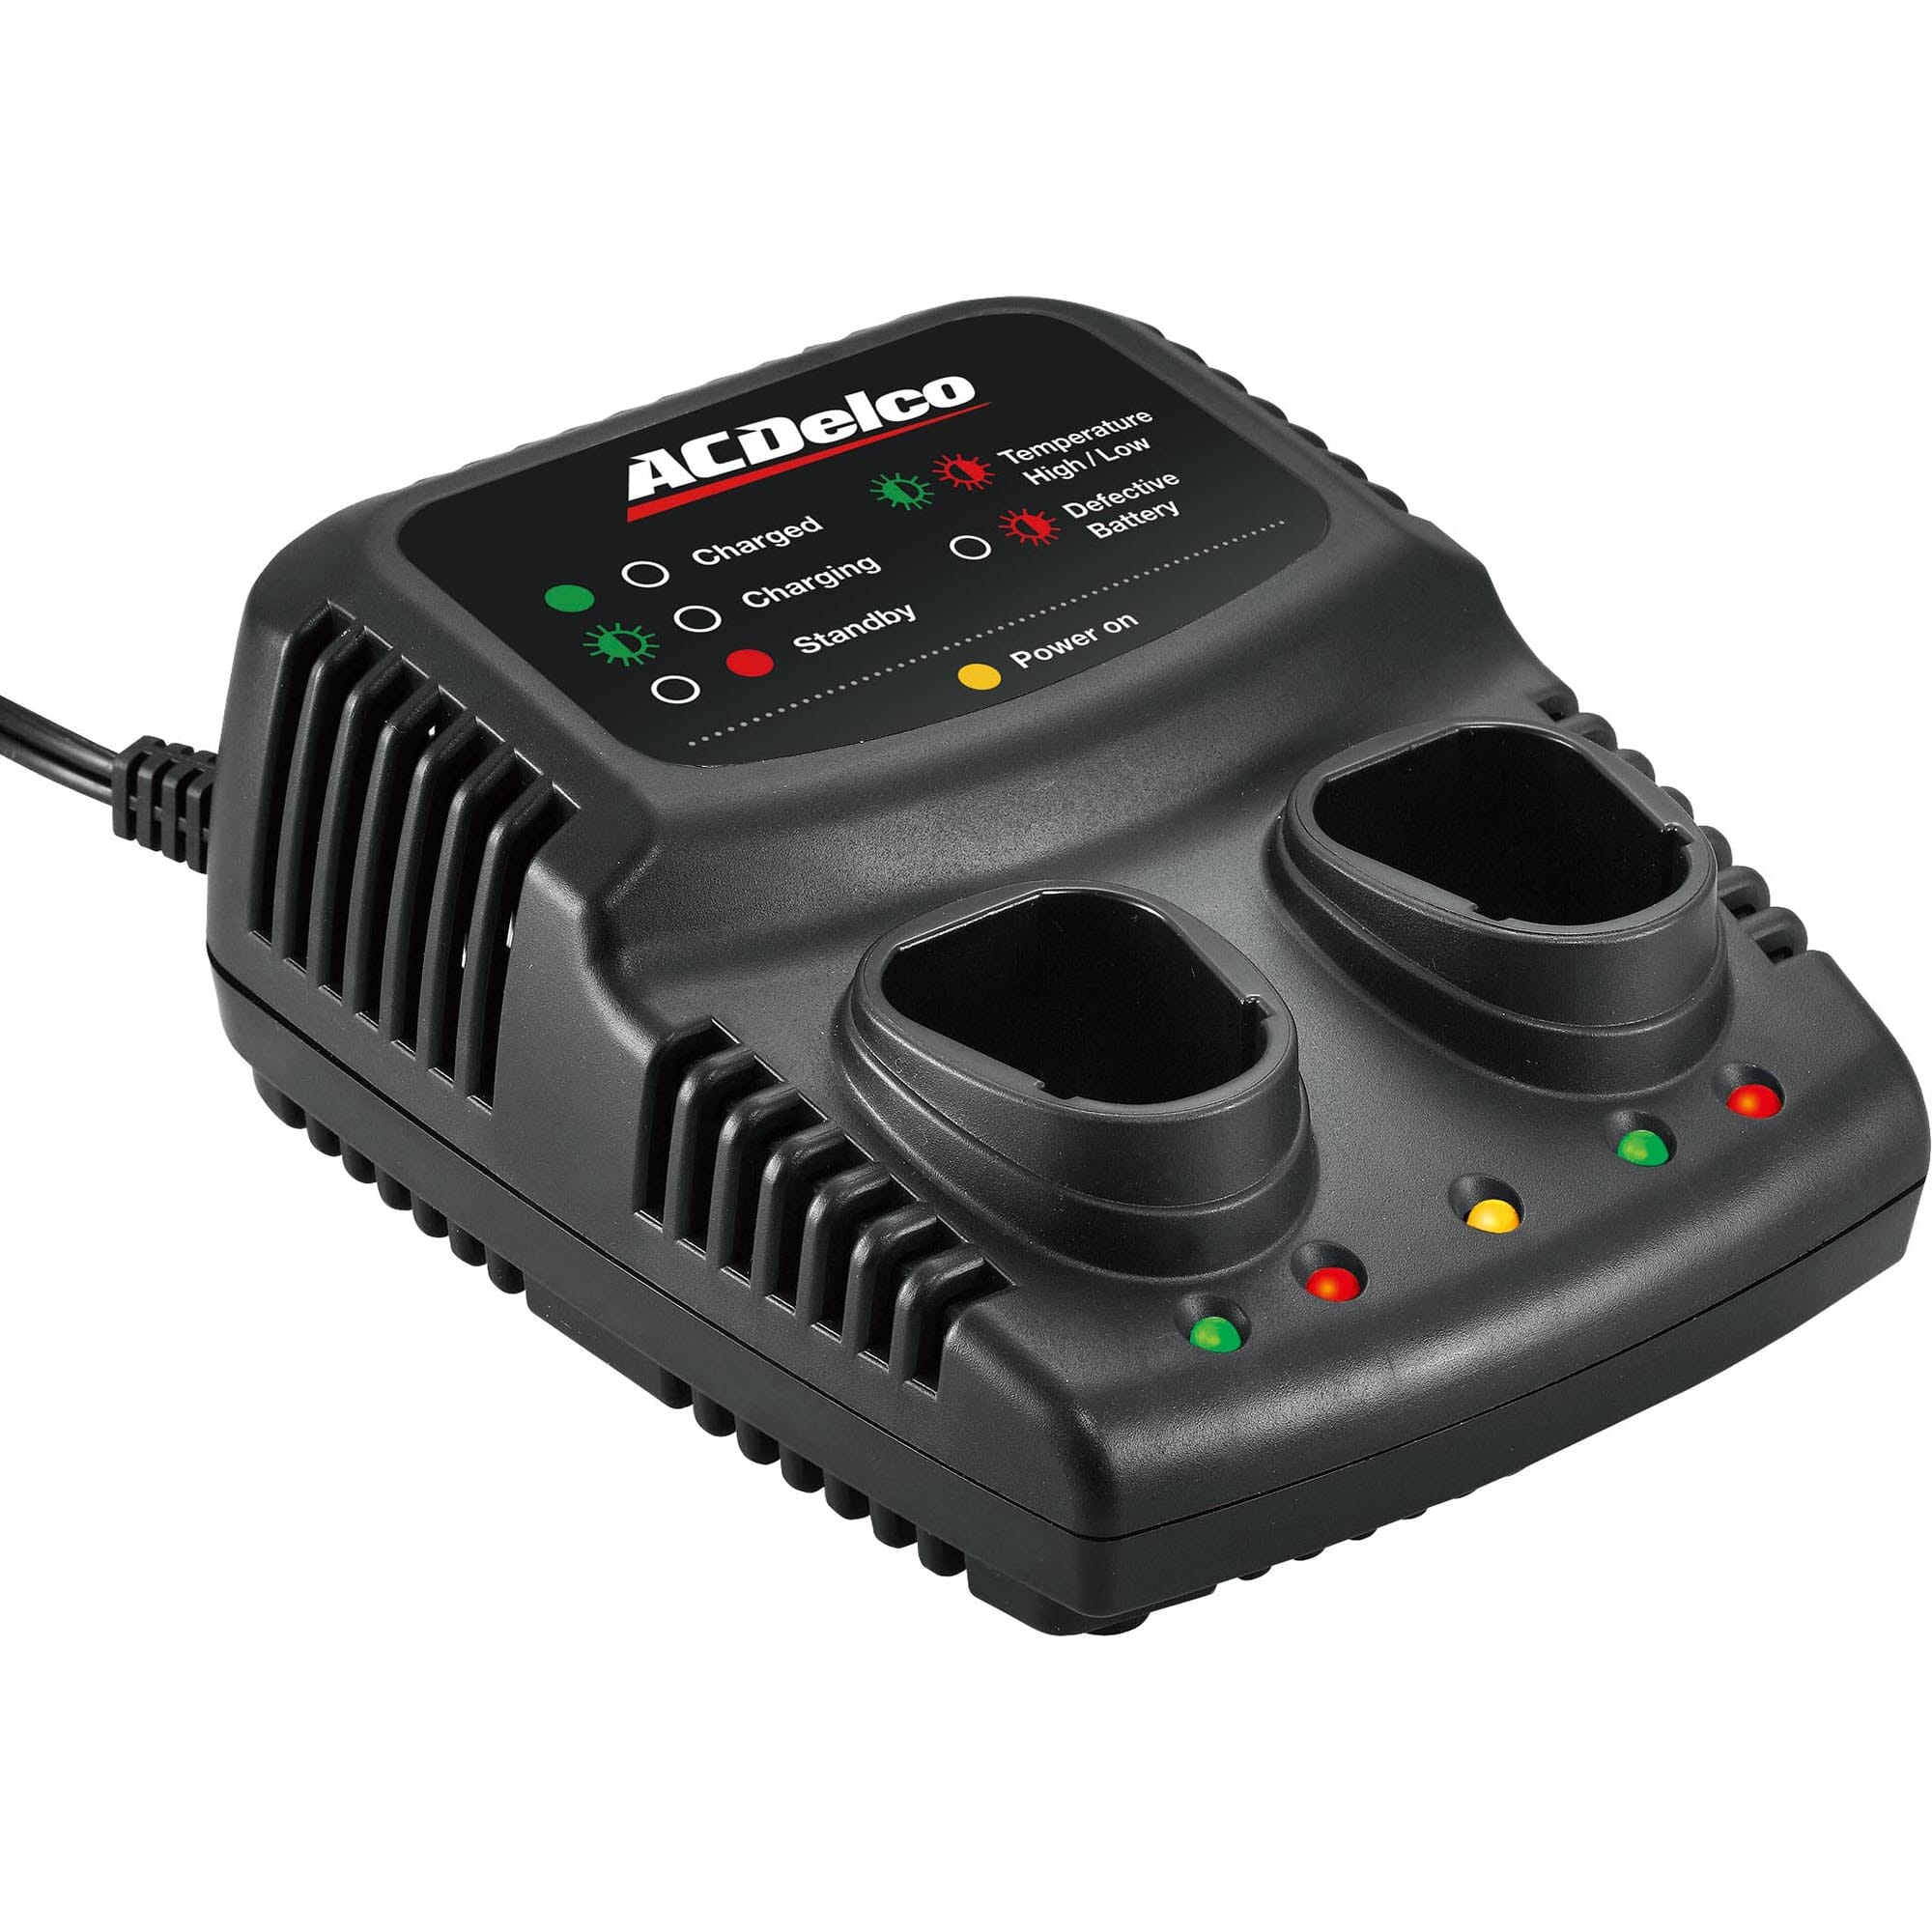 ARD888-K1G Lithium-Ion 8V Compact Combo Kit